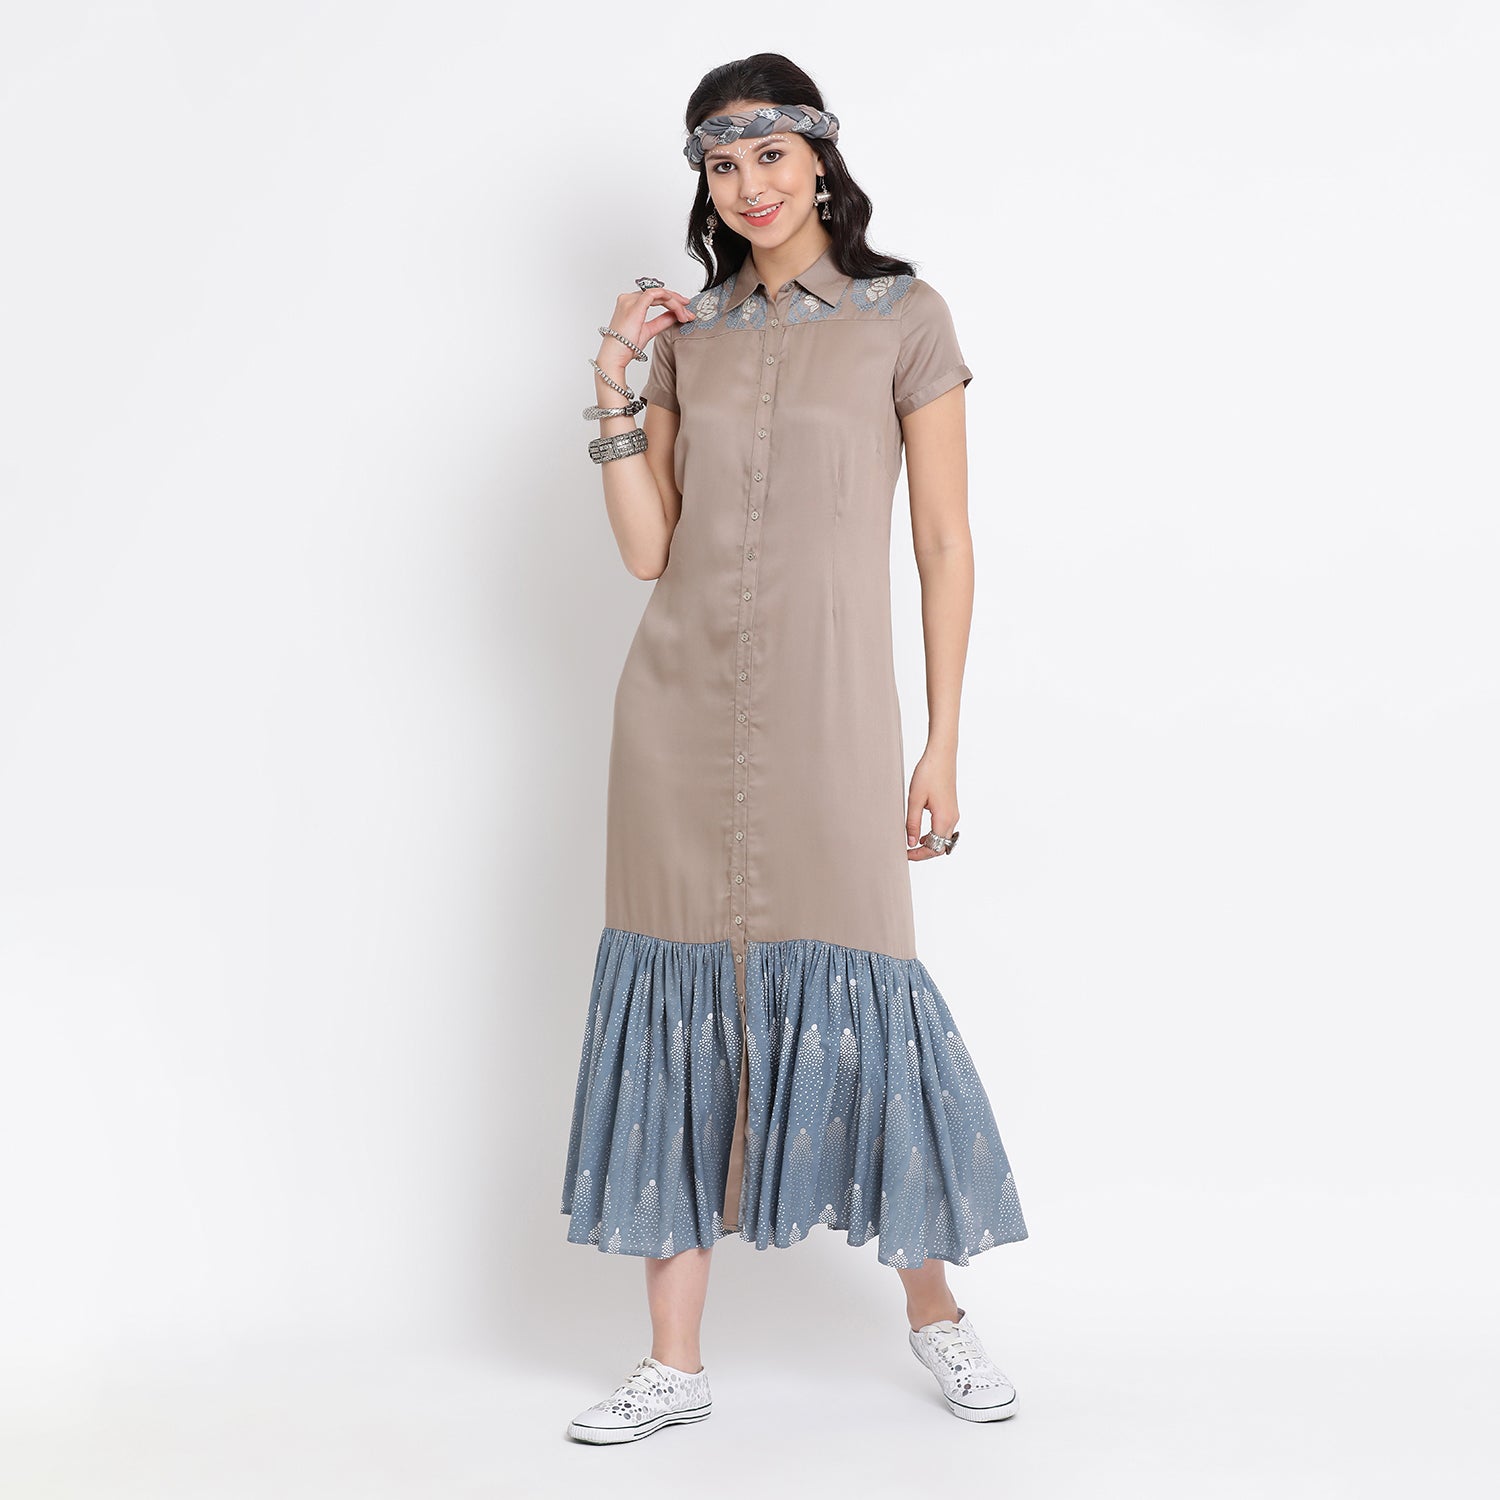 Grey viscose dress with blue thread embroidery on shoulder yoke